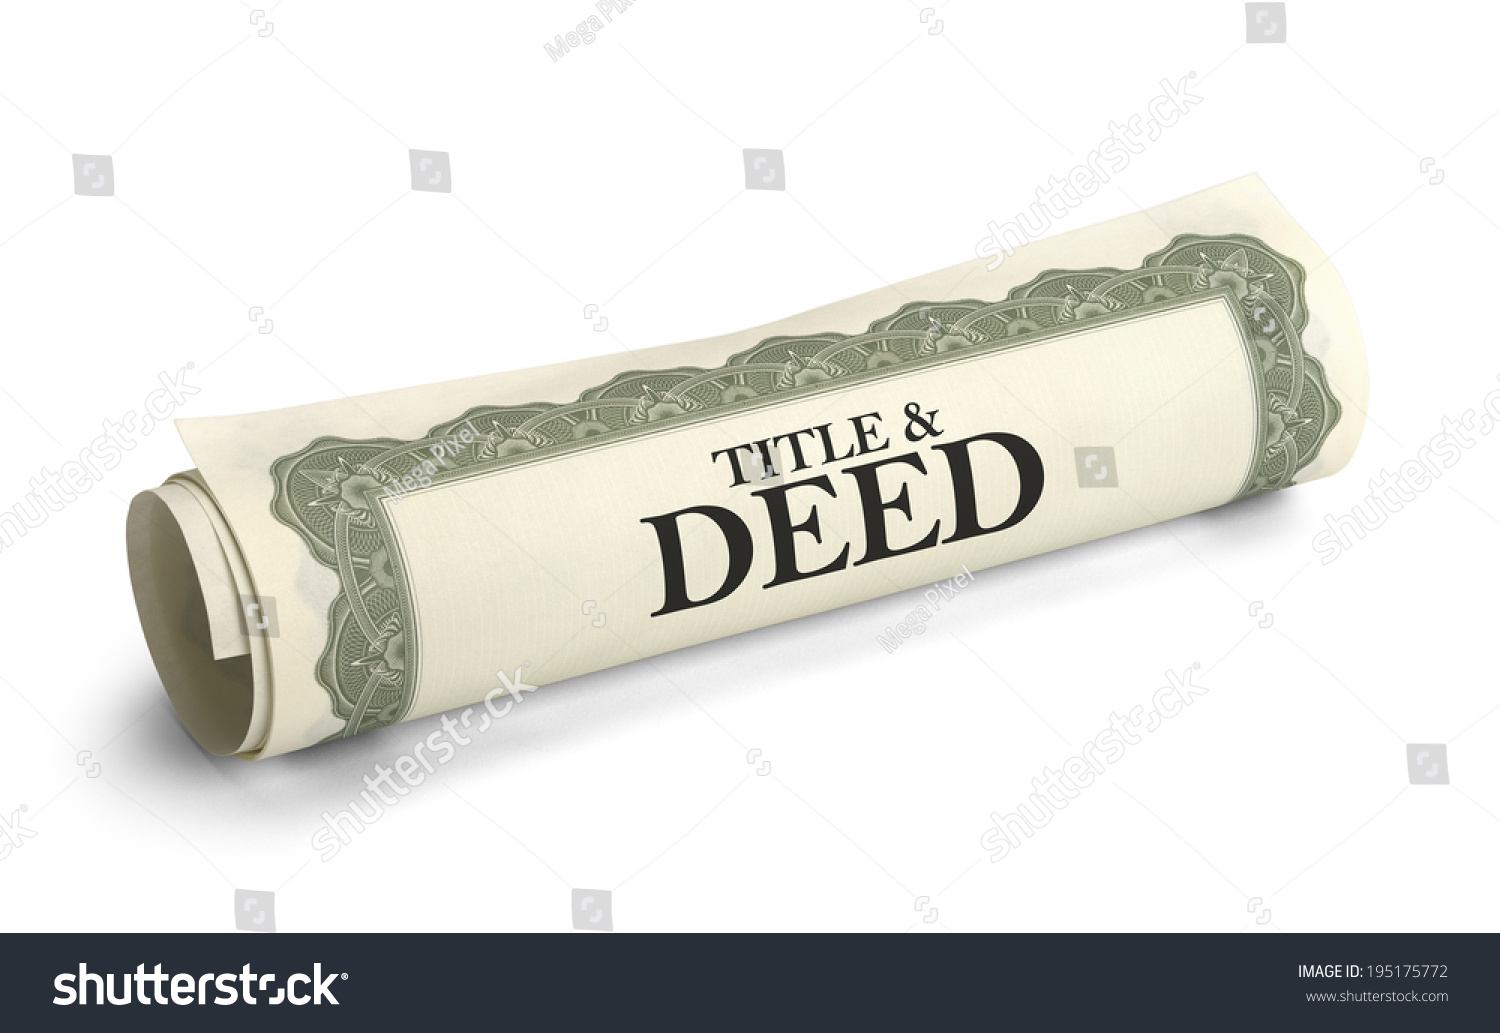 Title and Deed Paper Document Rolled and Isolated on a White Background. #195175772